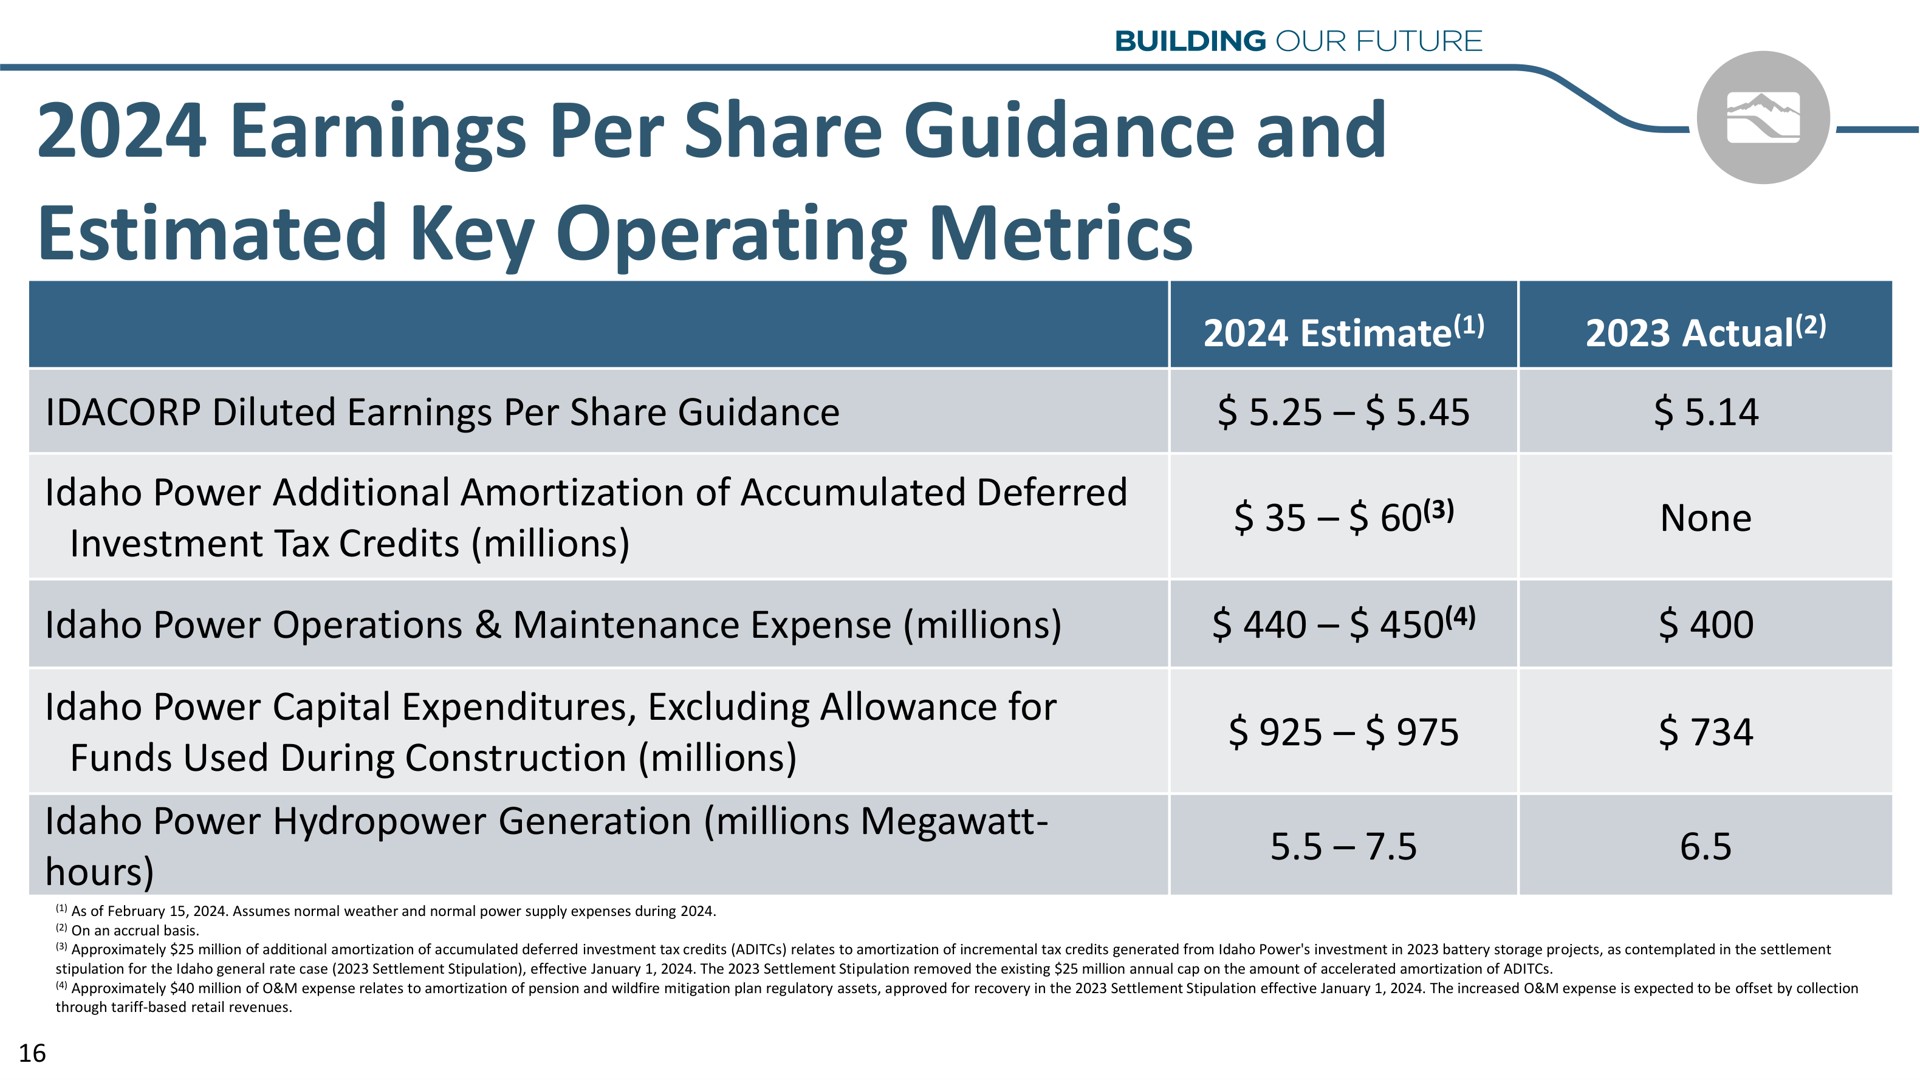 earnings per share guidance and estimated key operating metrics goy | Idacorp